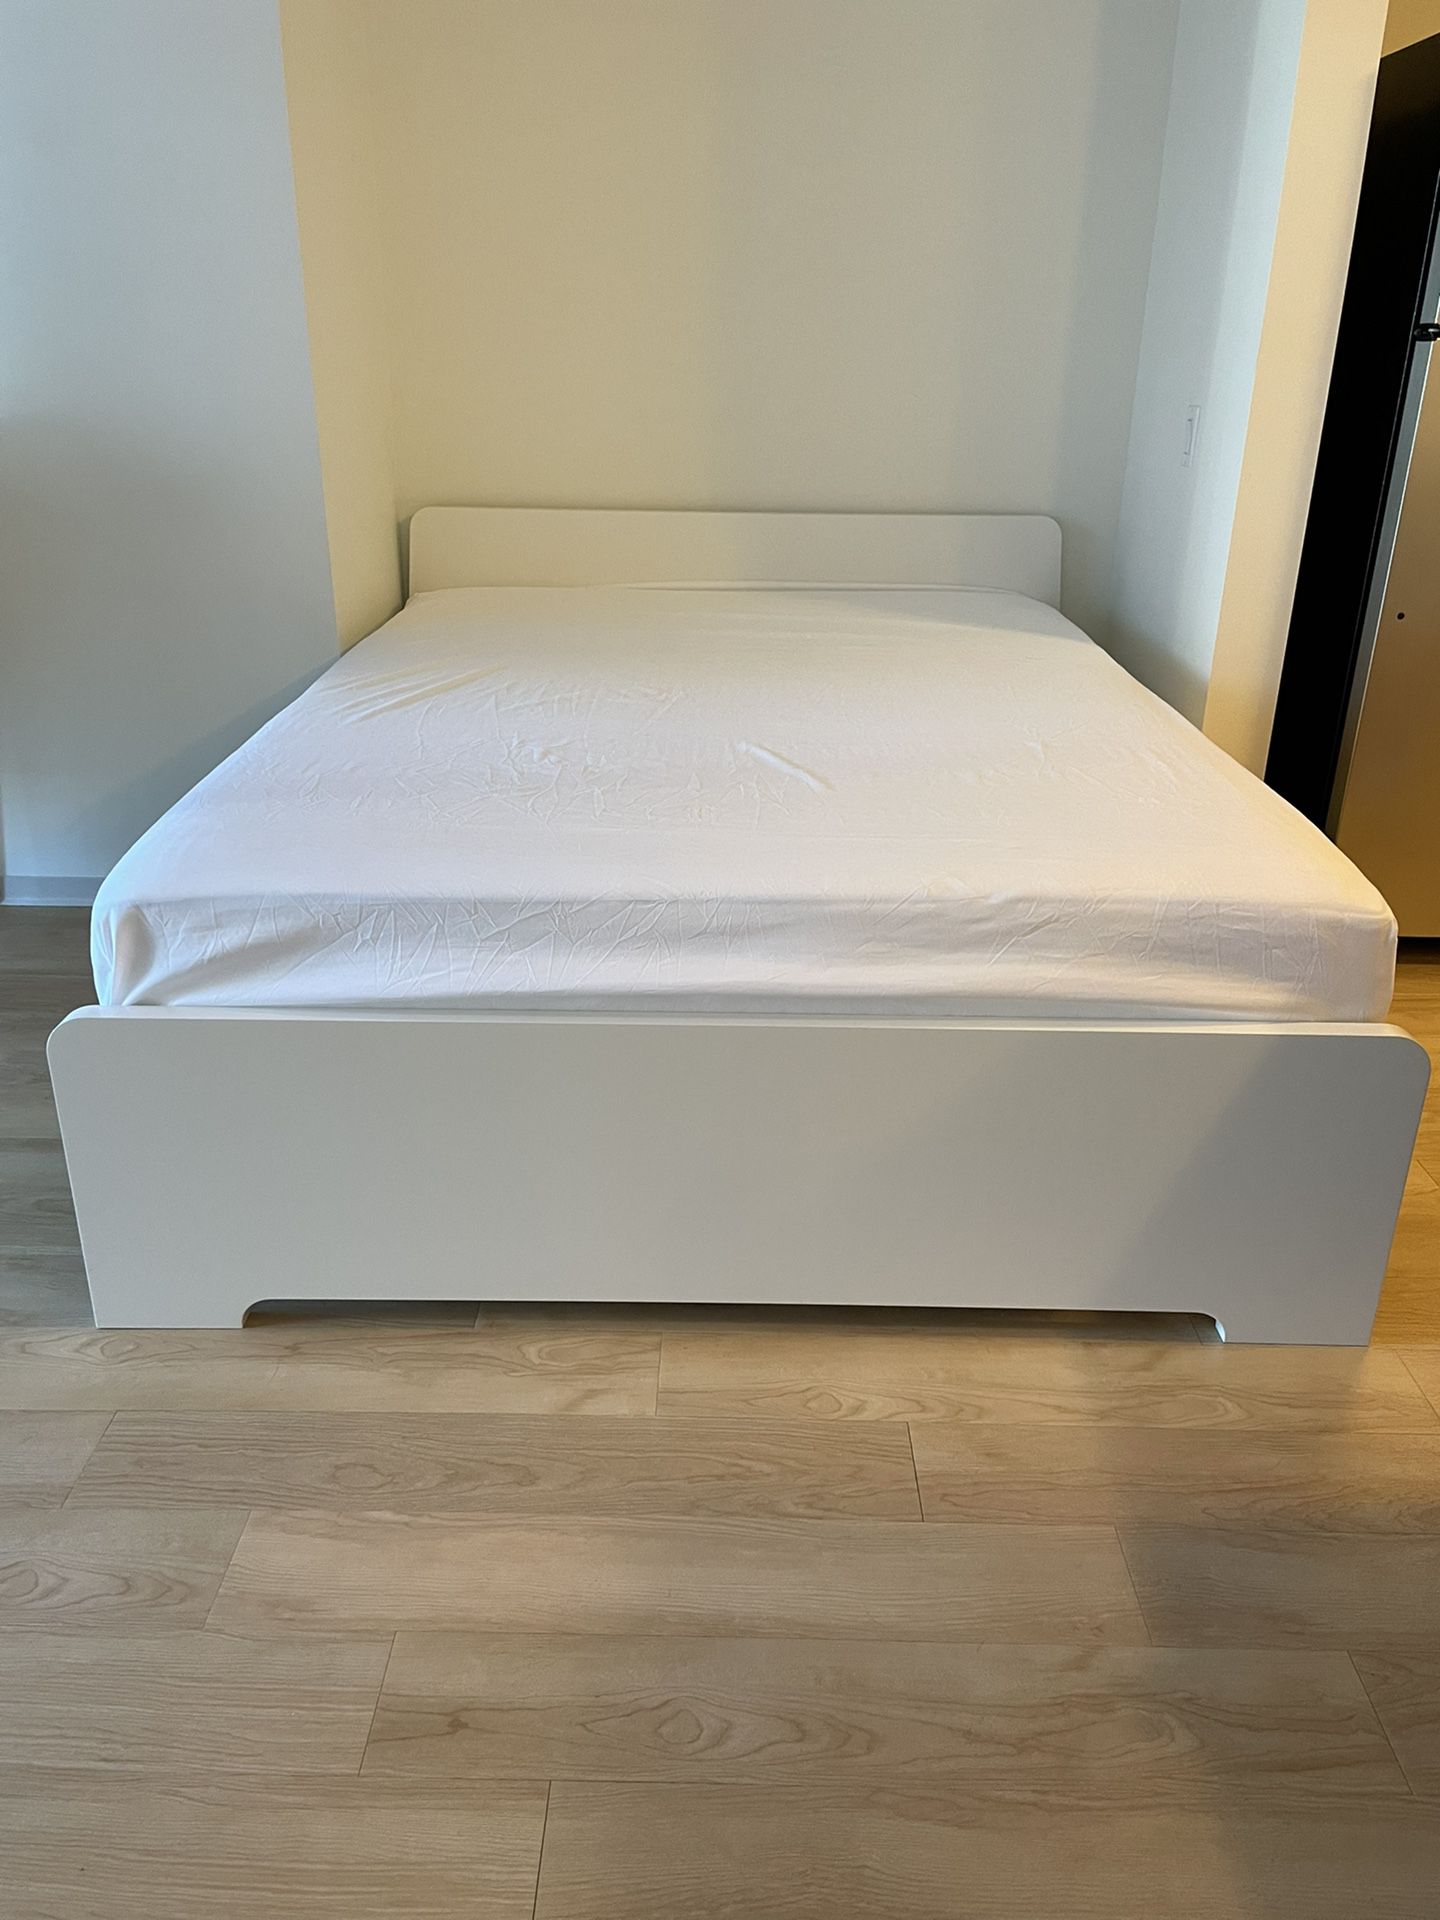 IKEA MALM Bed Frame Queen Size